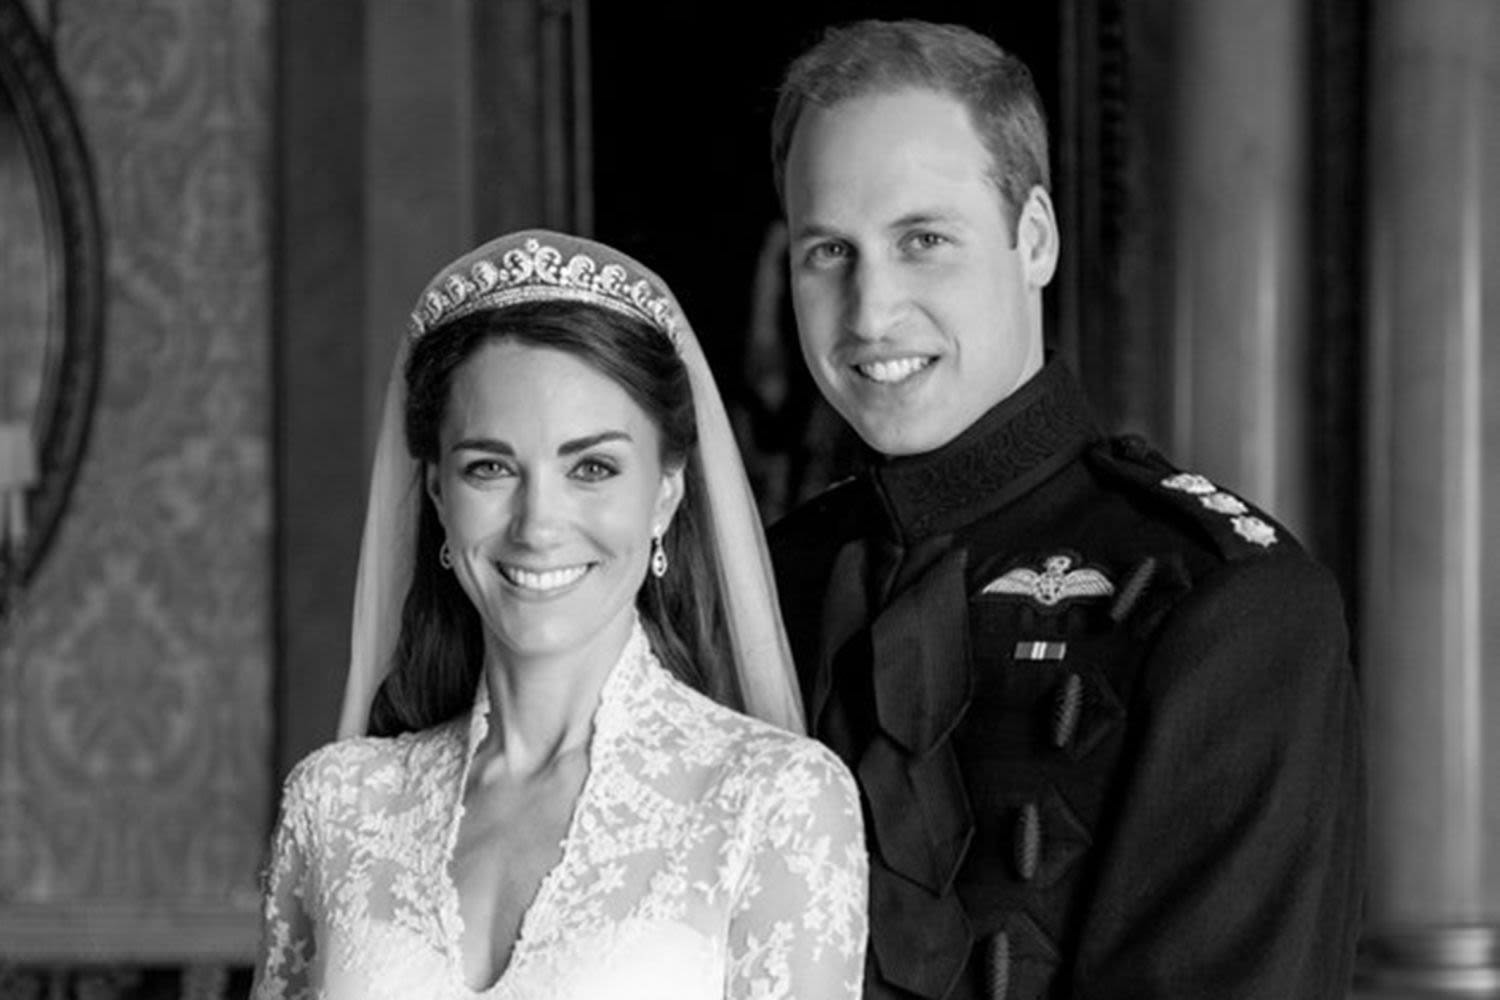 Kate Middleton and Prince William's New Anniversary Photo Shows a Little-Known Fact About His Wedding Outfit